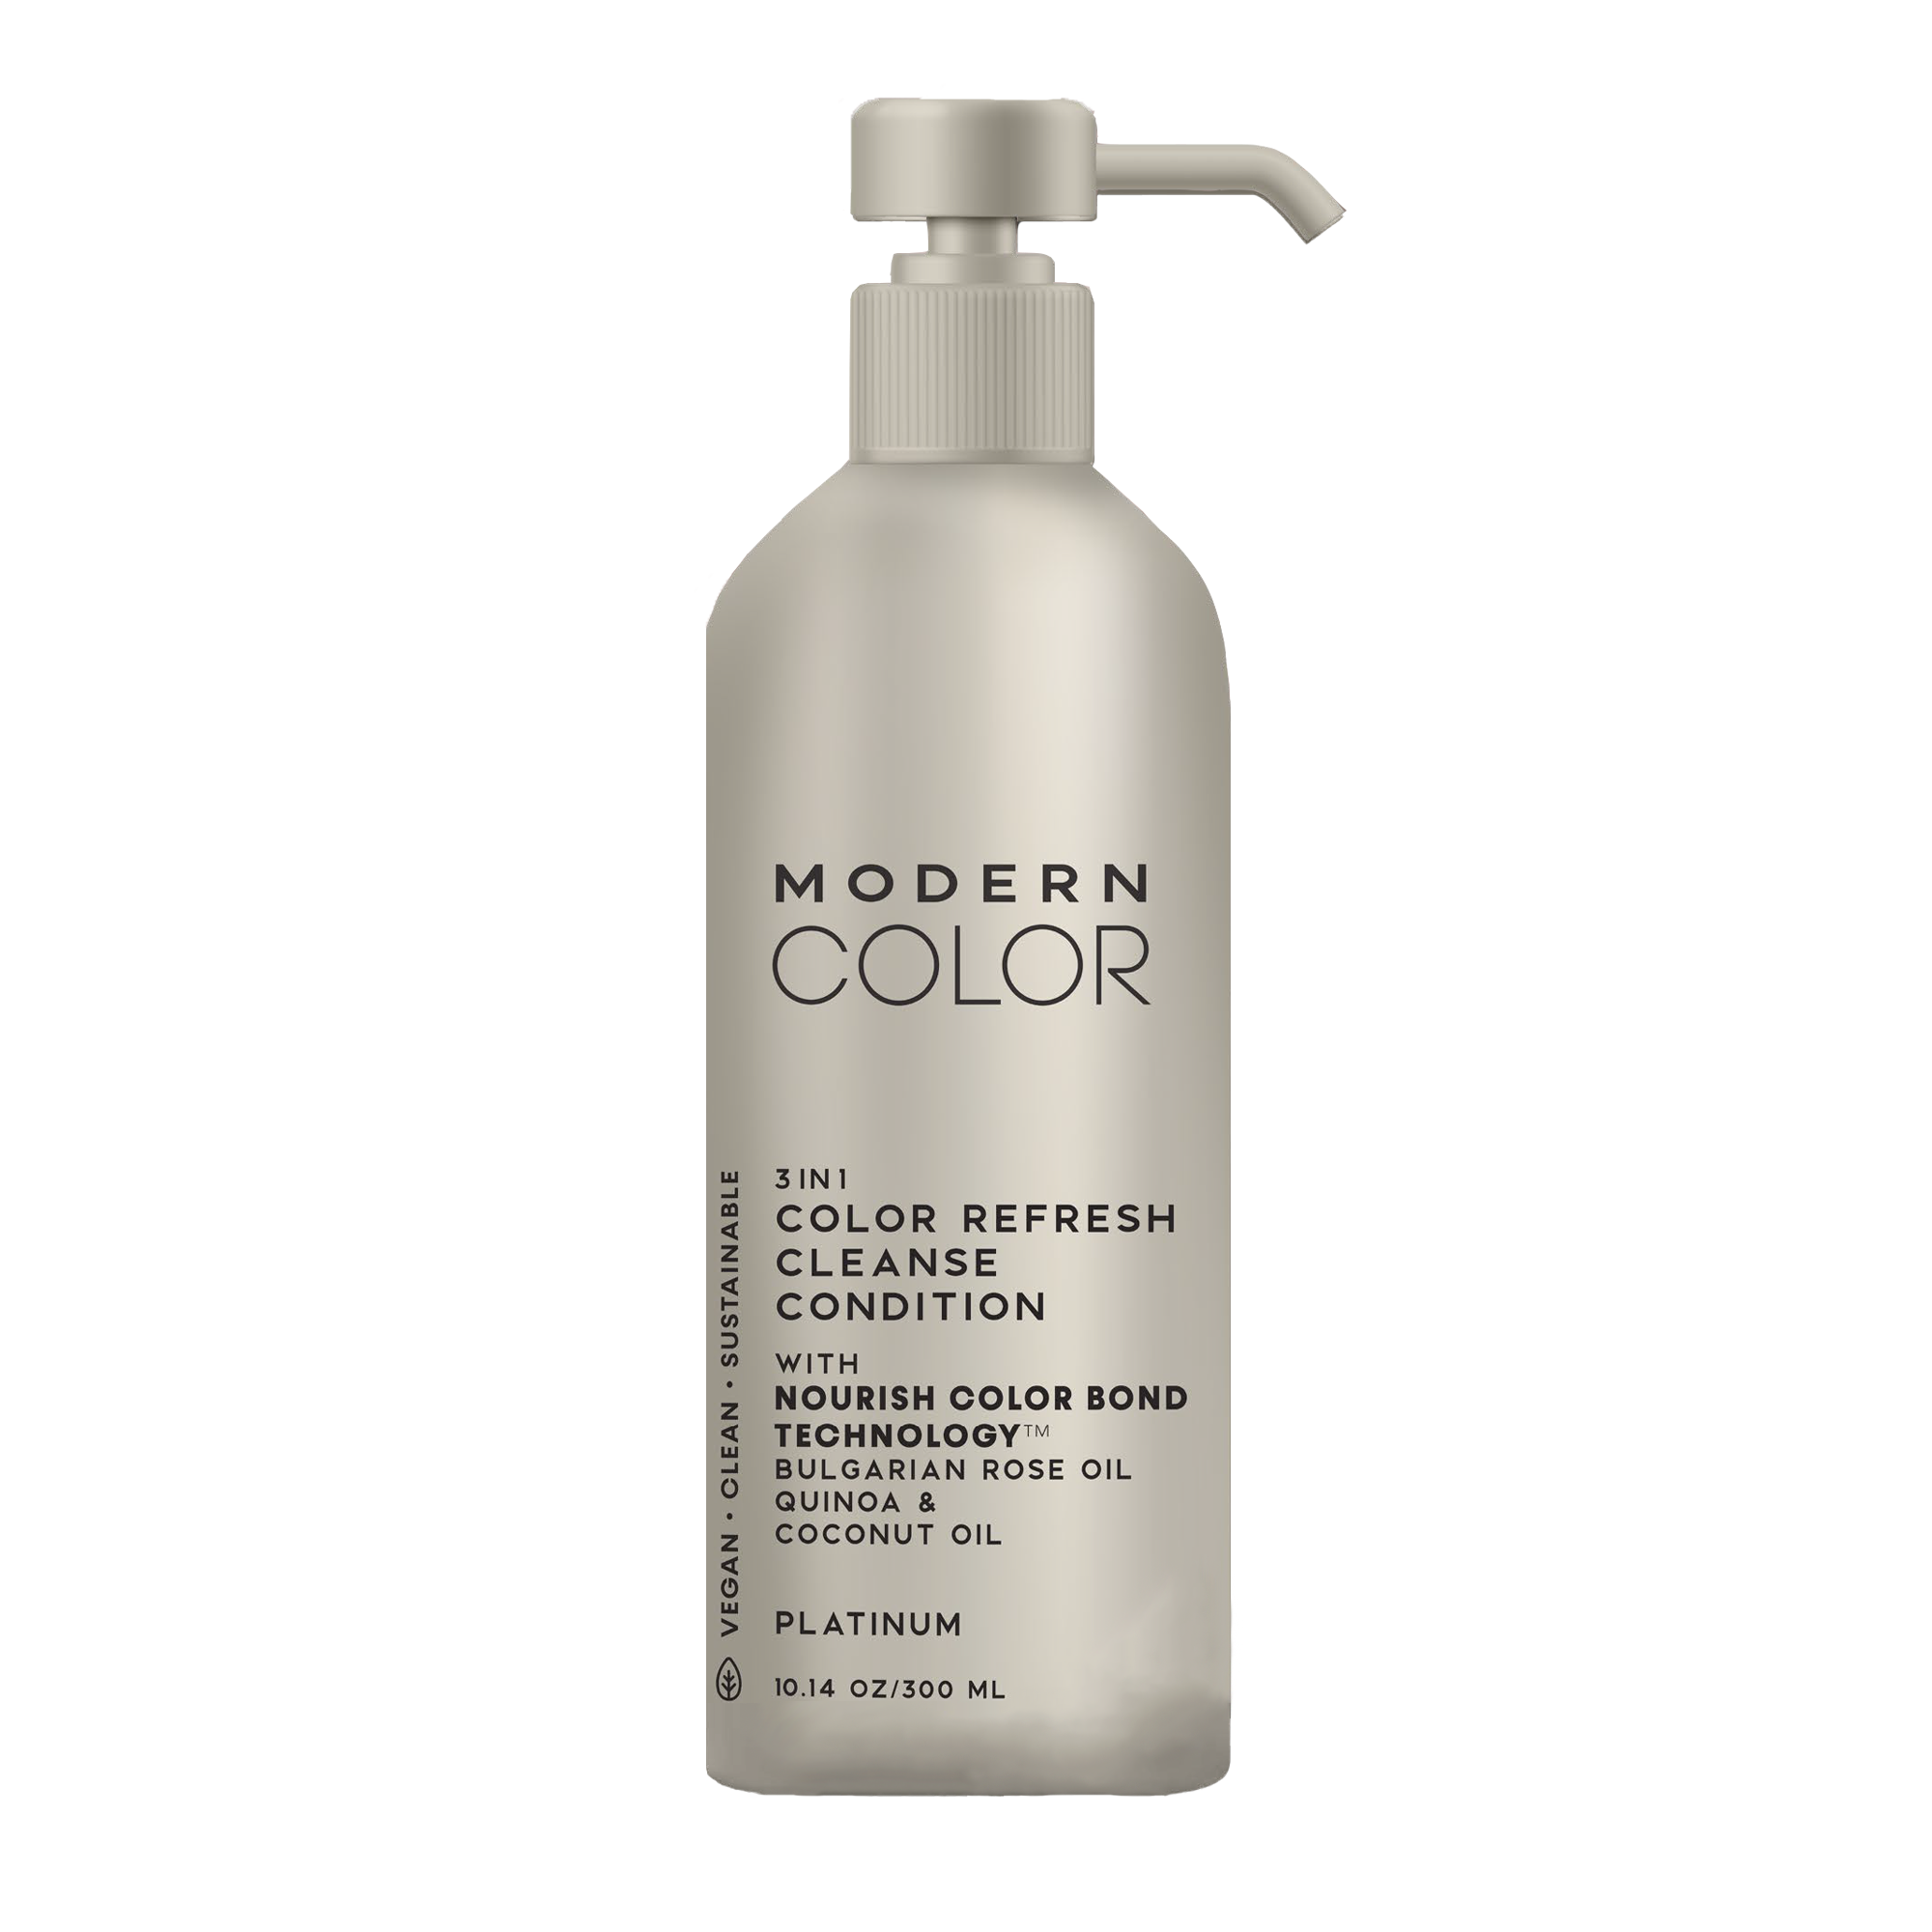 Modern Color 3-in-1 Color Refresh Cleanse Condition - Platinum / PLATINUM